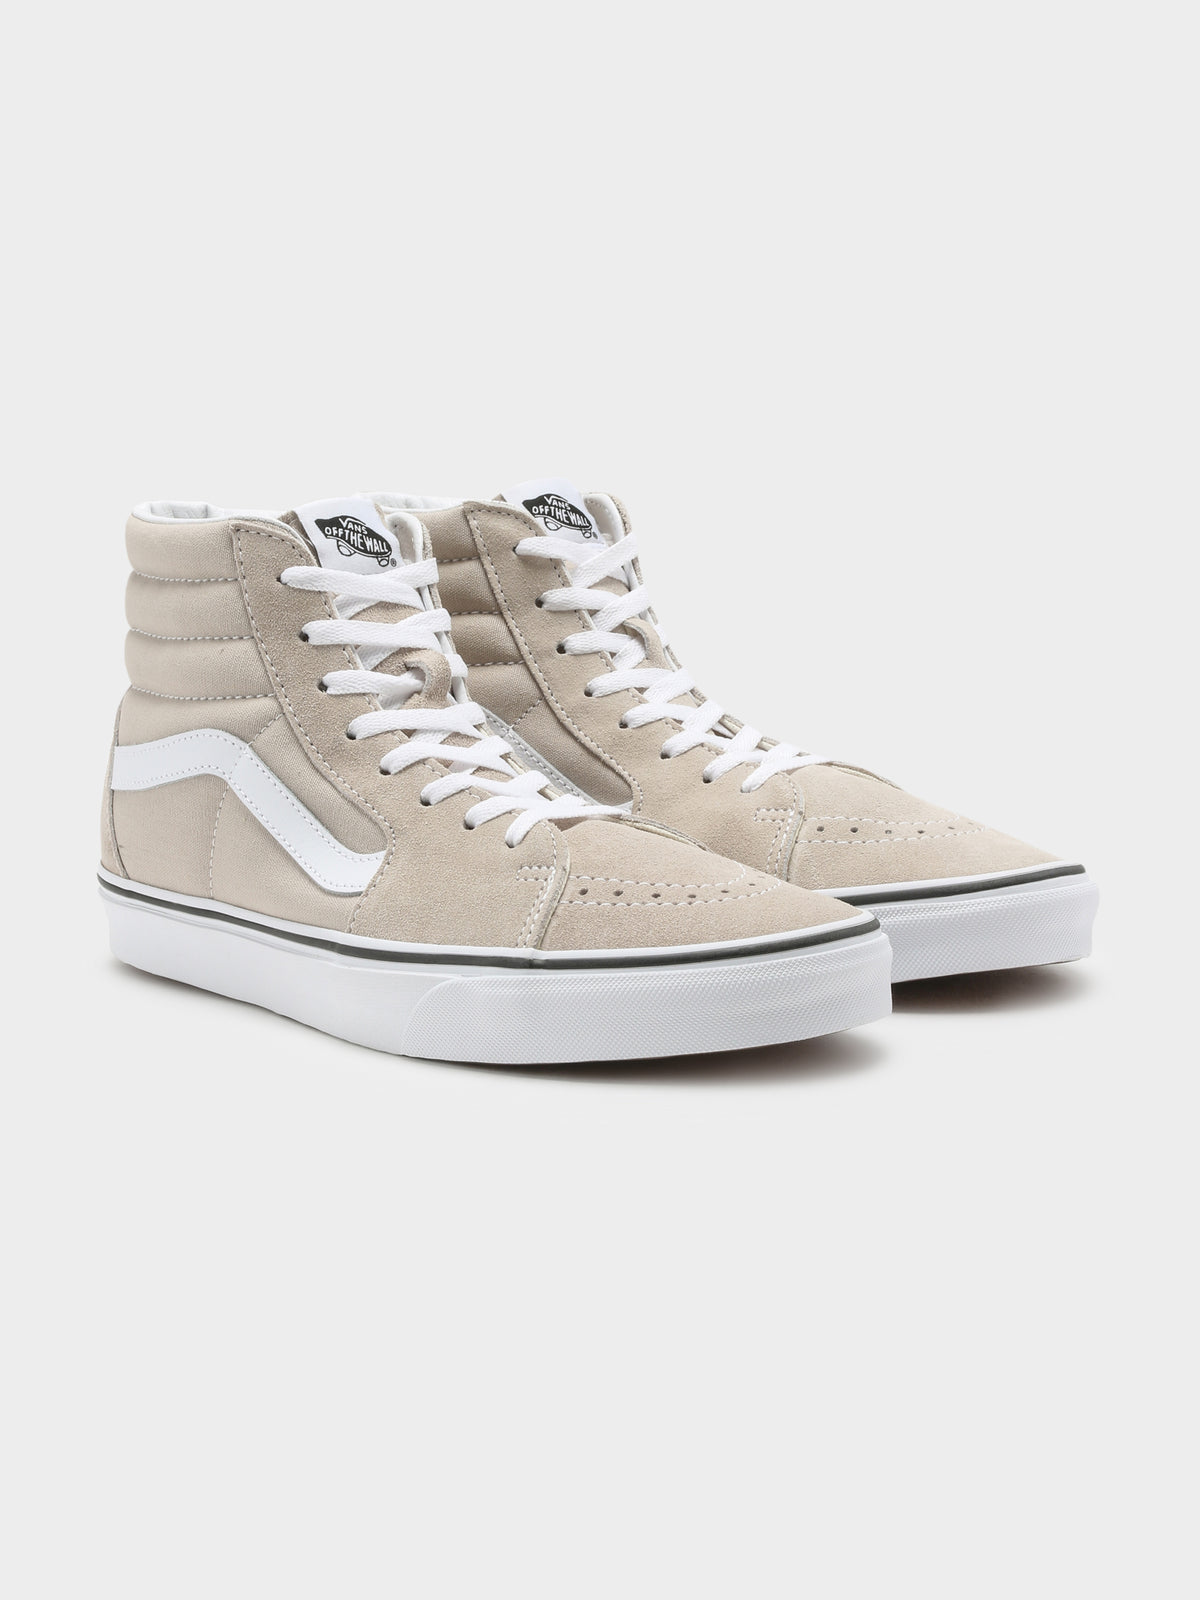 Womens Sk8 High Color Theory Sneakers in French Oak